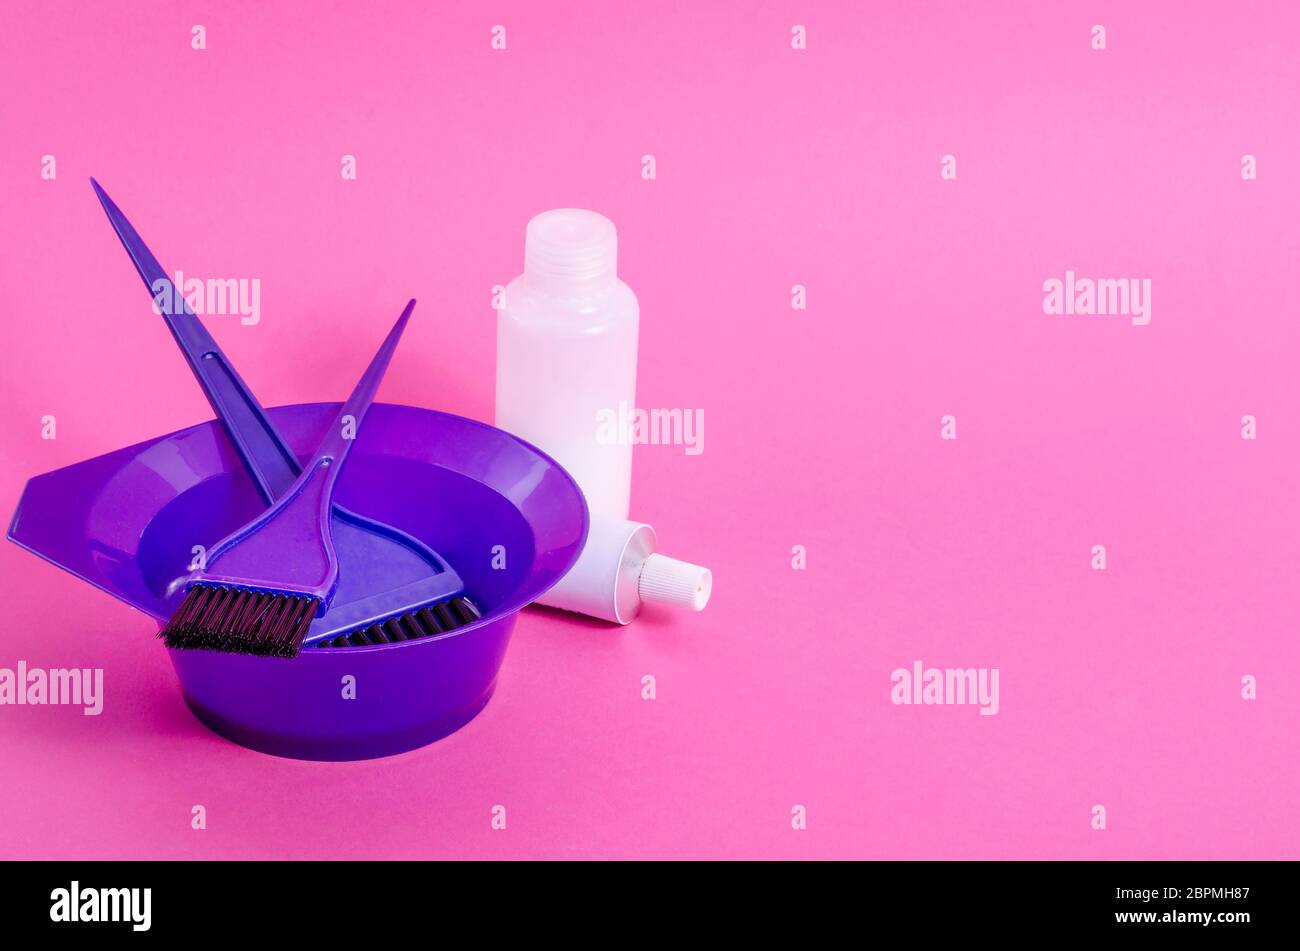 https://c8.alamy.com/comp/2BPMH87/hair-dyeing-kit-purple-bowl-with-brushes-hair-dye-on-a-pink-background-with-copy-space-beauty-and-fashion-hairstyle-concept-photo-beauty-saloon-2BPMH87.jpg